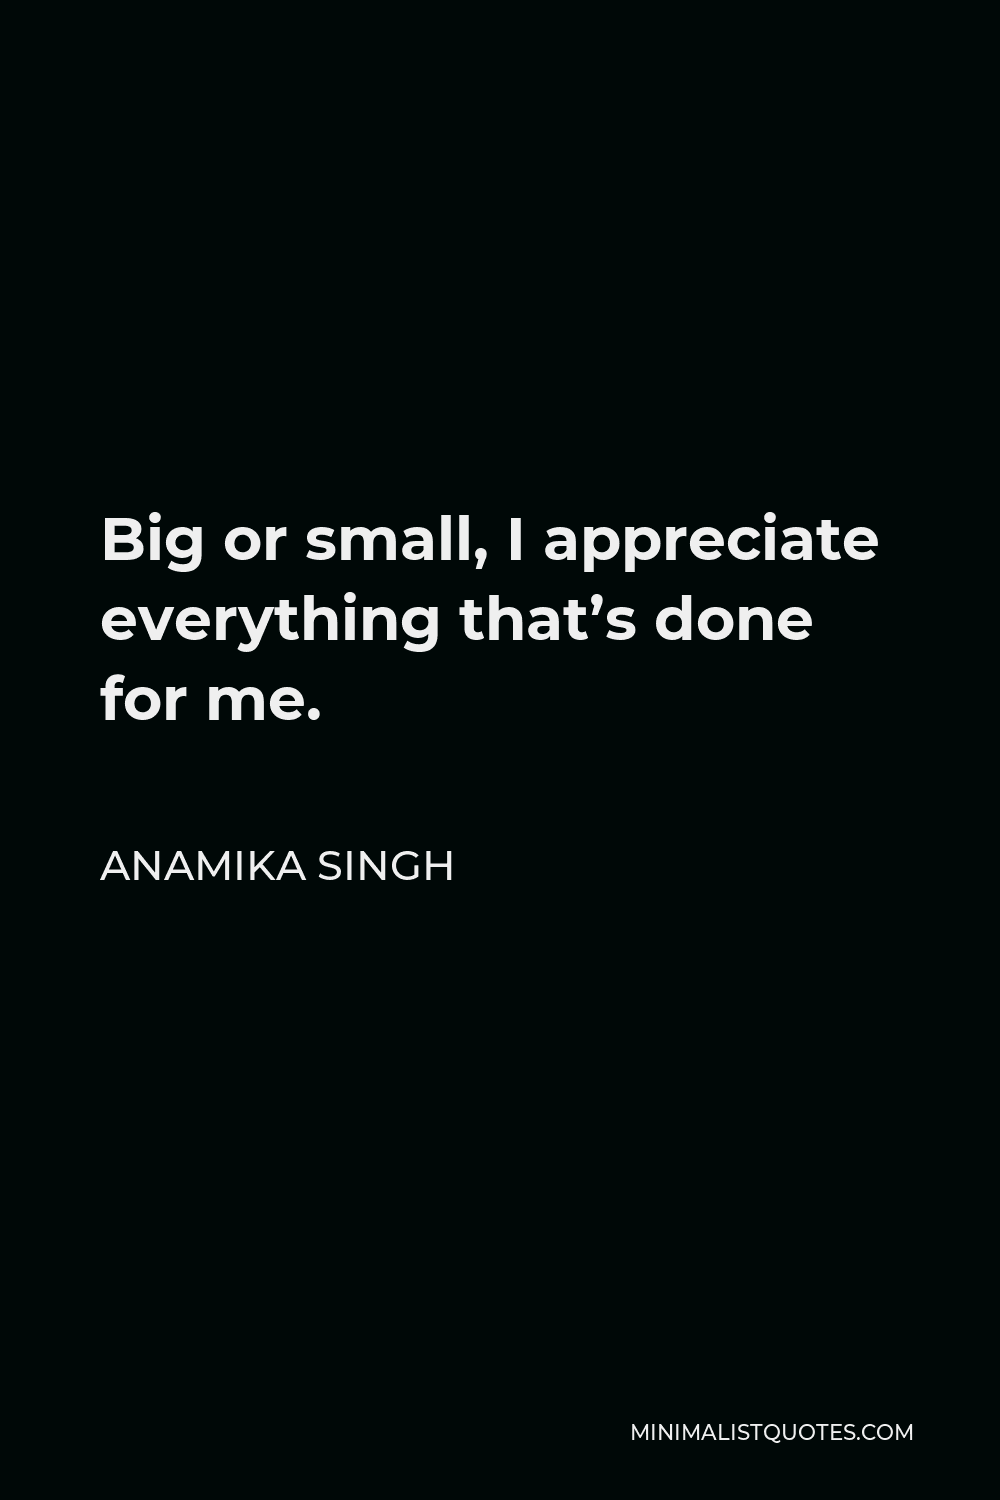 Anamika Singh Quote - Big or small, I appreciate everything that’s done for me.